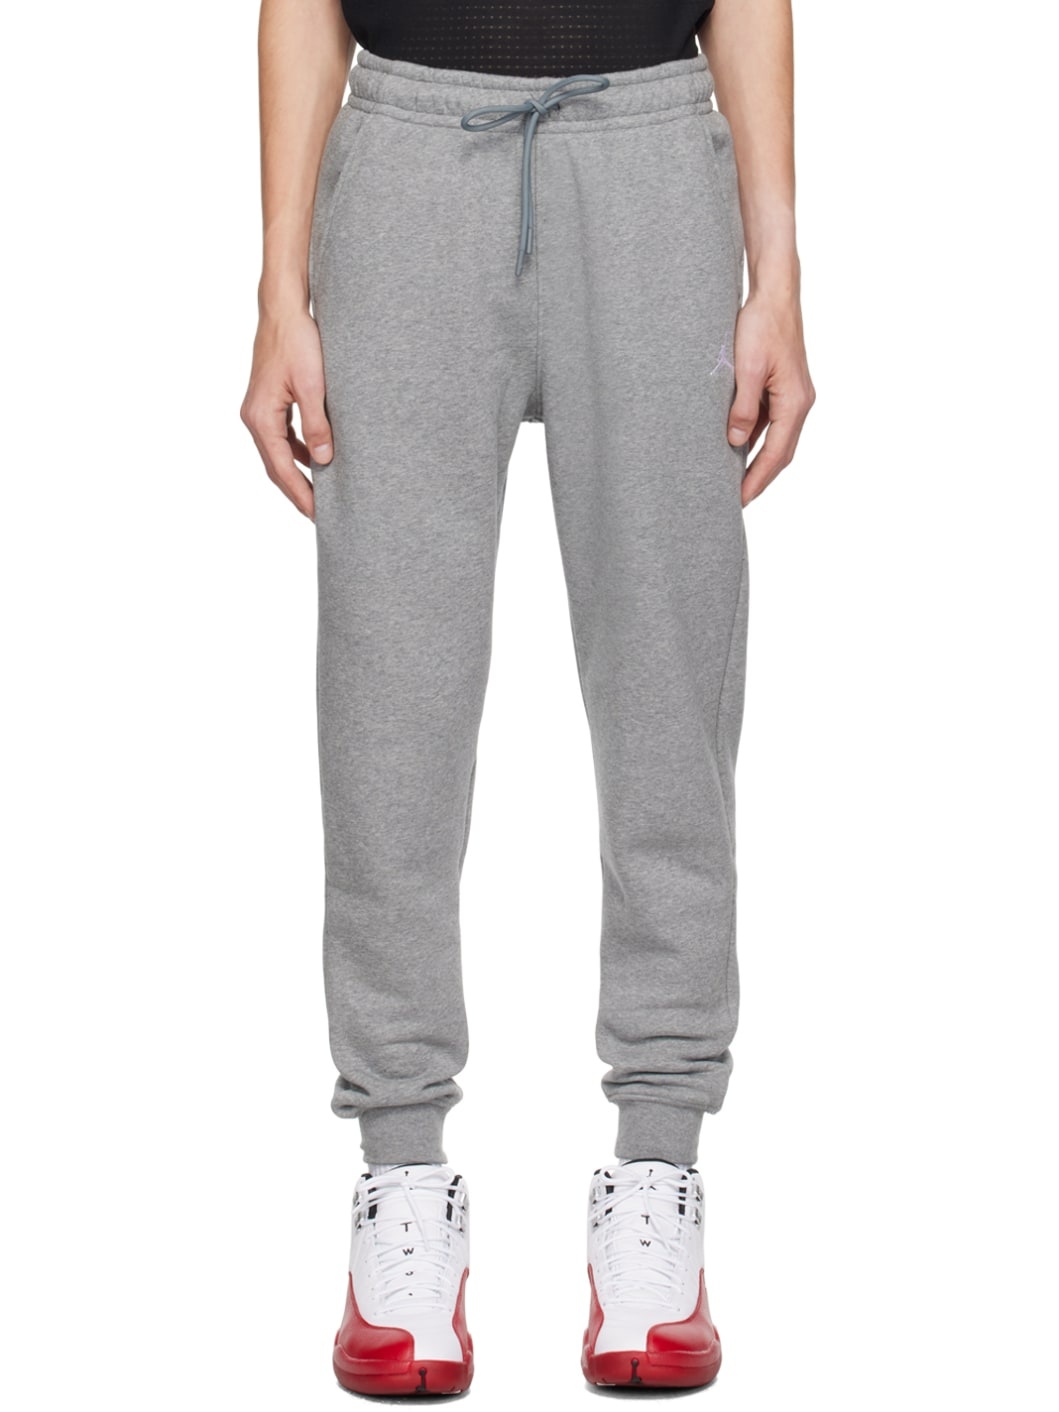 Gray Embroidered Sweatpants - 1